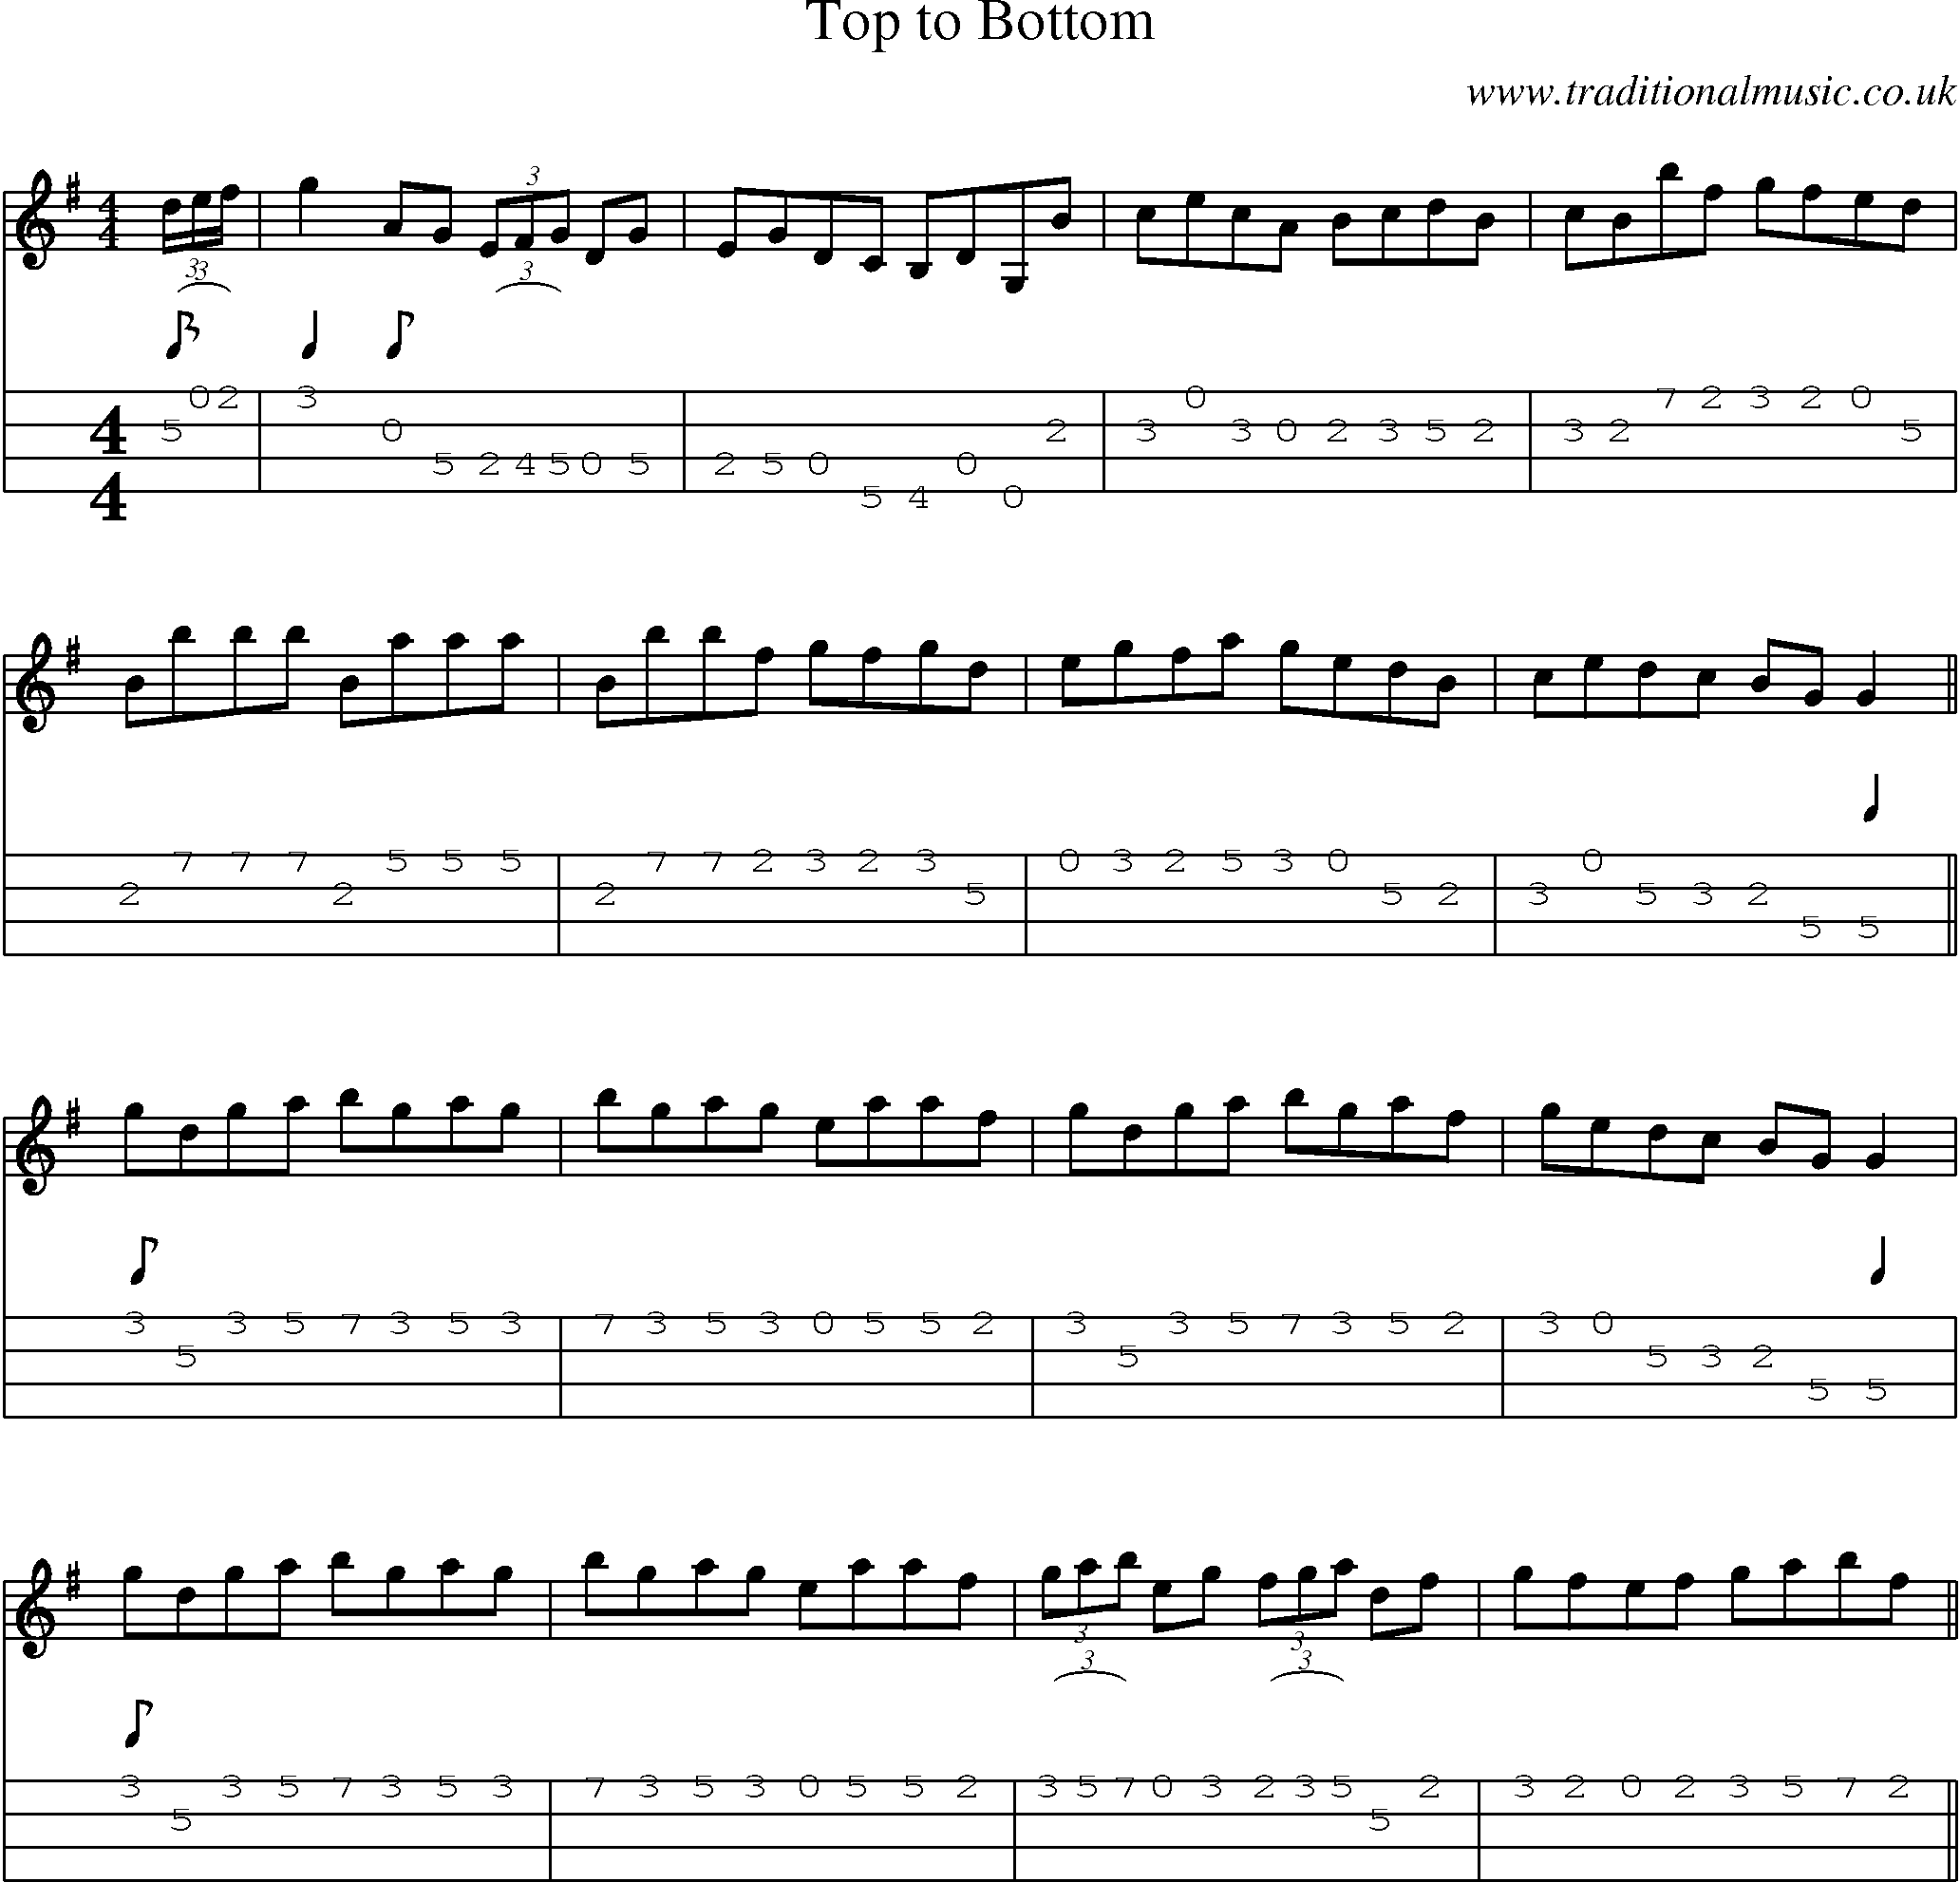 Music Score and Mandolin Tabs for Top To Bottom